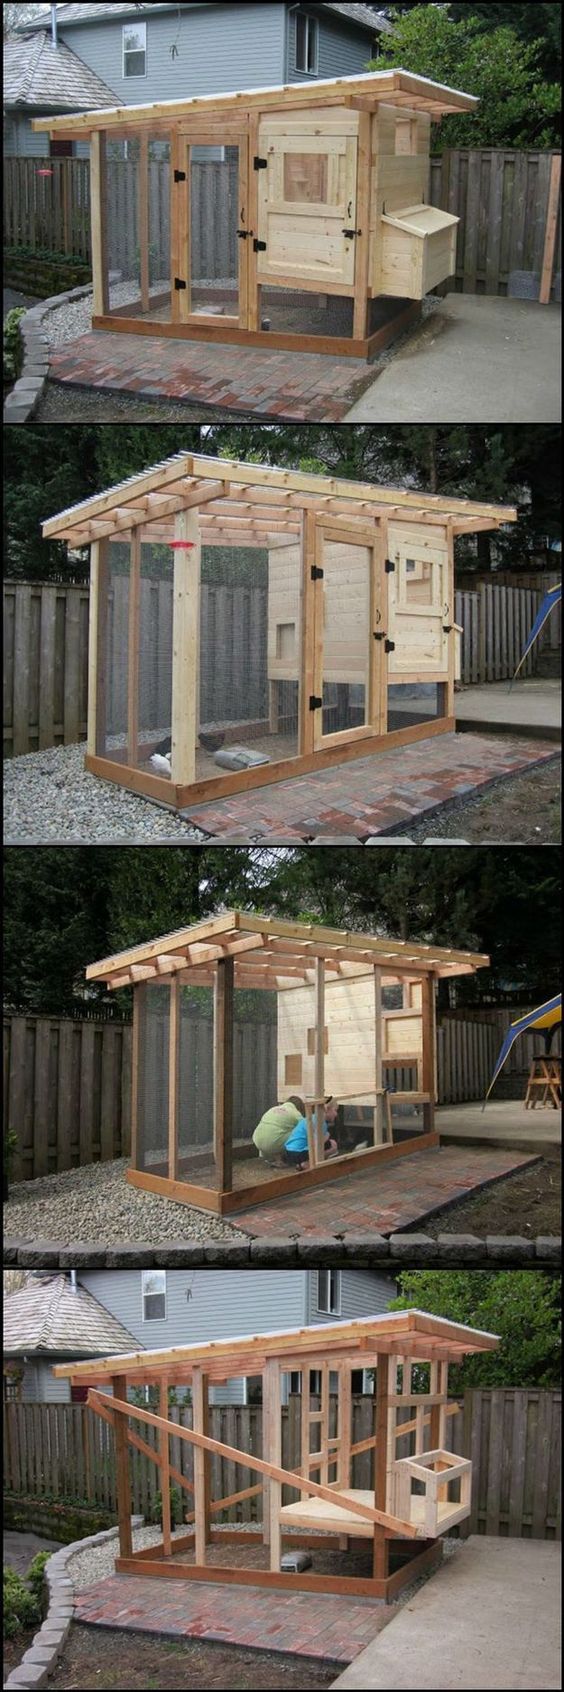 more-Awesome-Chicken-Coop-Ideas-and-Designs-11